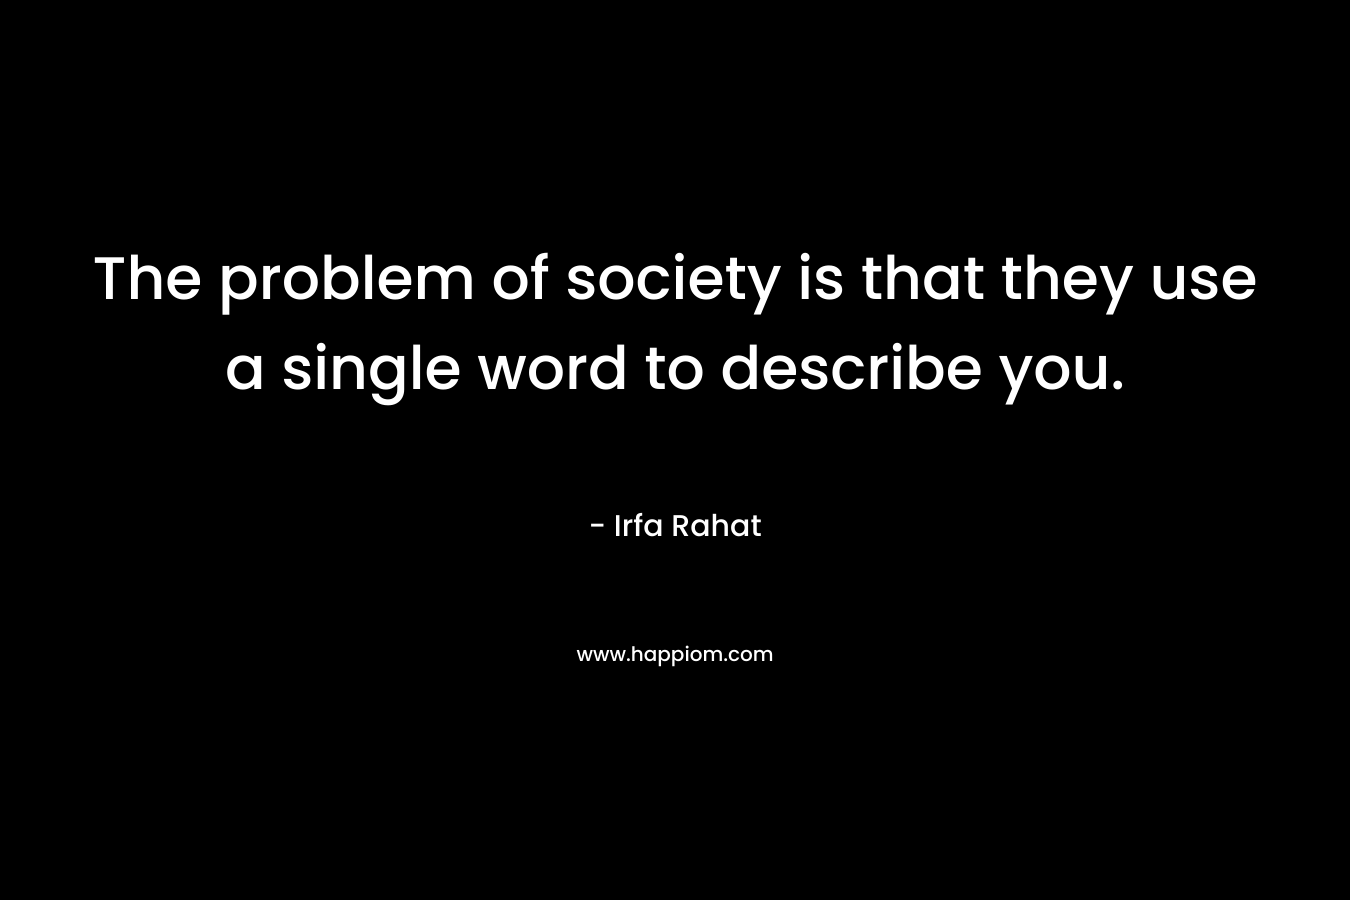 The problem of society is that they use a single word to describe you. – Irfa Rahat